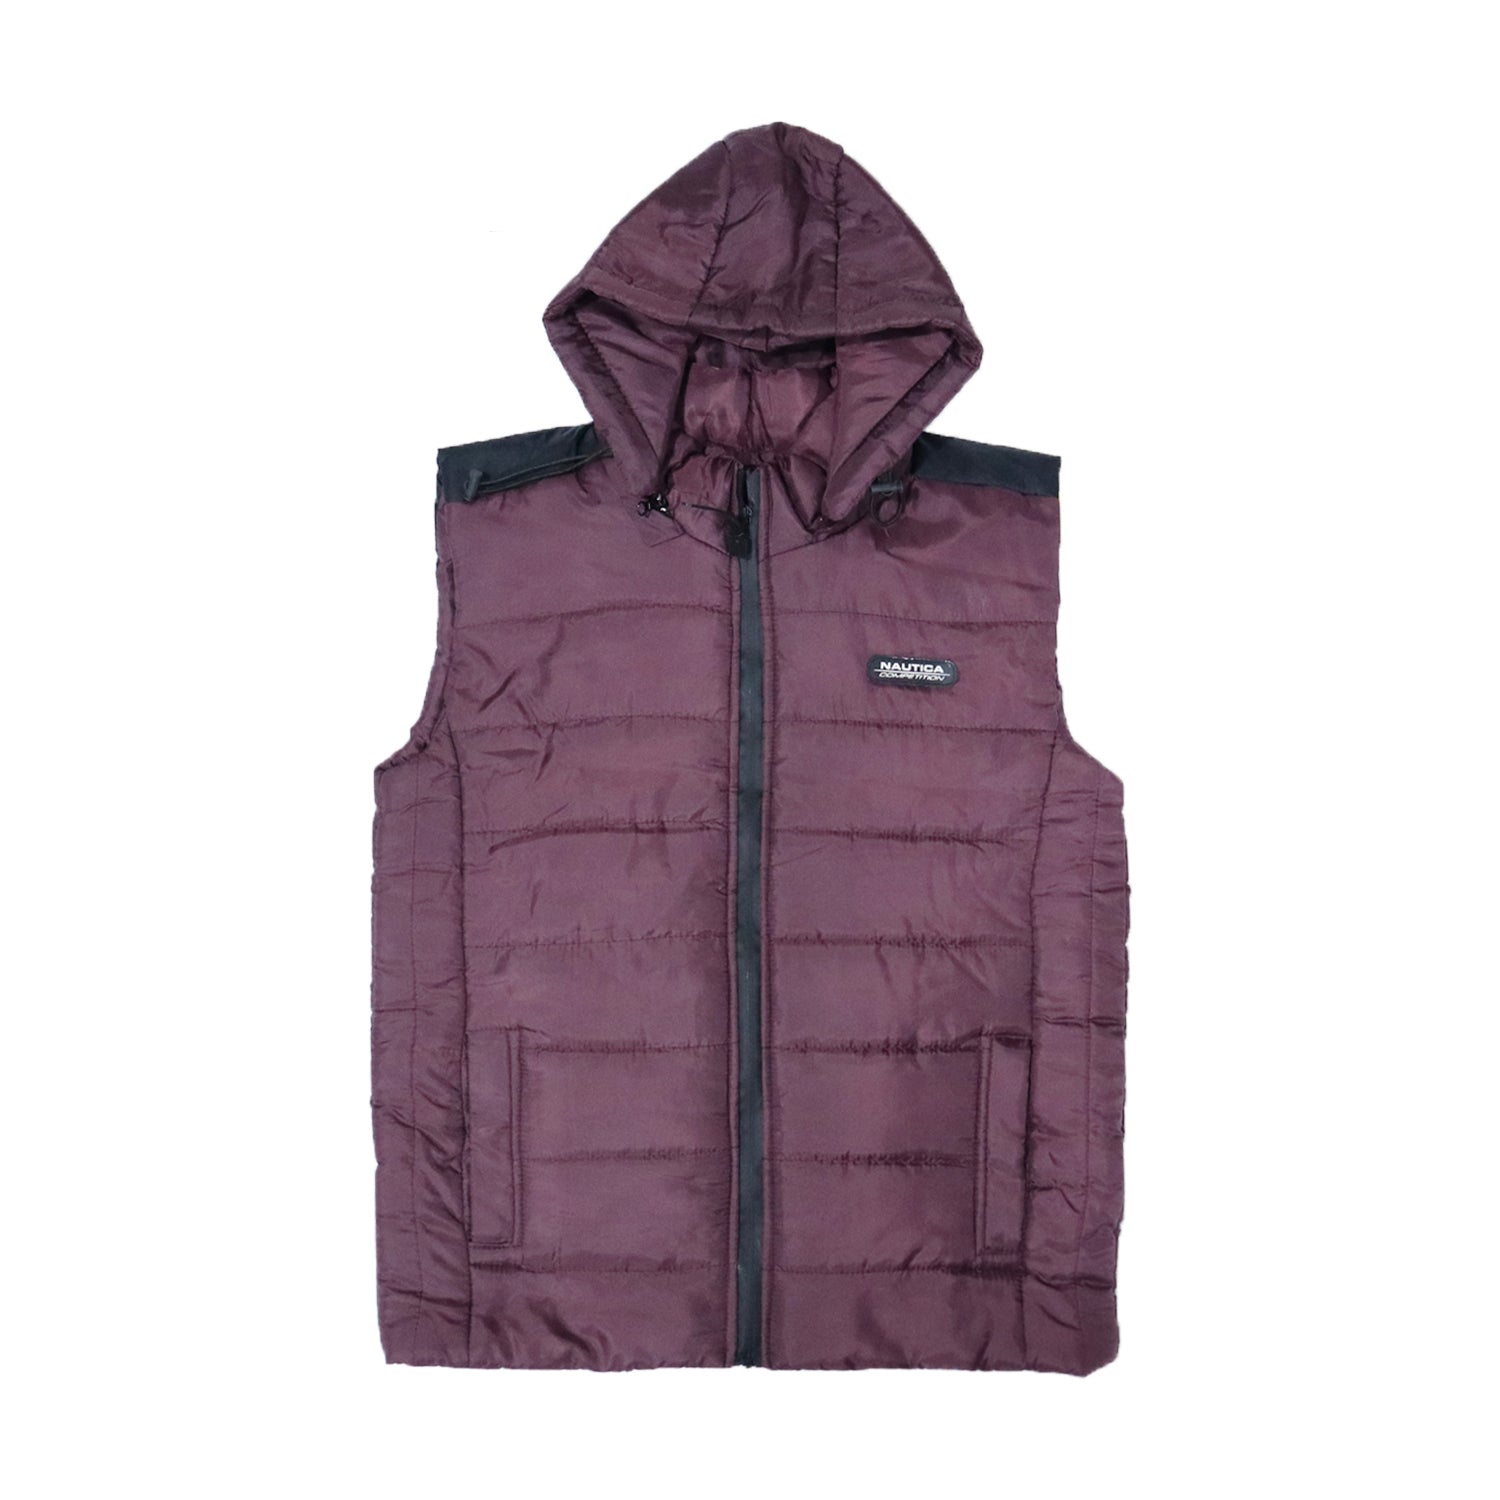 BRANDED DARK MAROON SLEEVELESS PUFFER JACKET WITH REMOVABLE HOOD FOR MENS